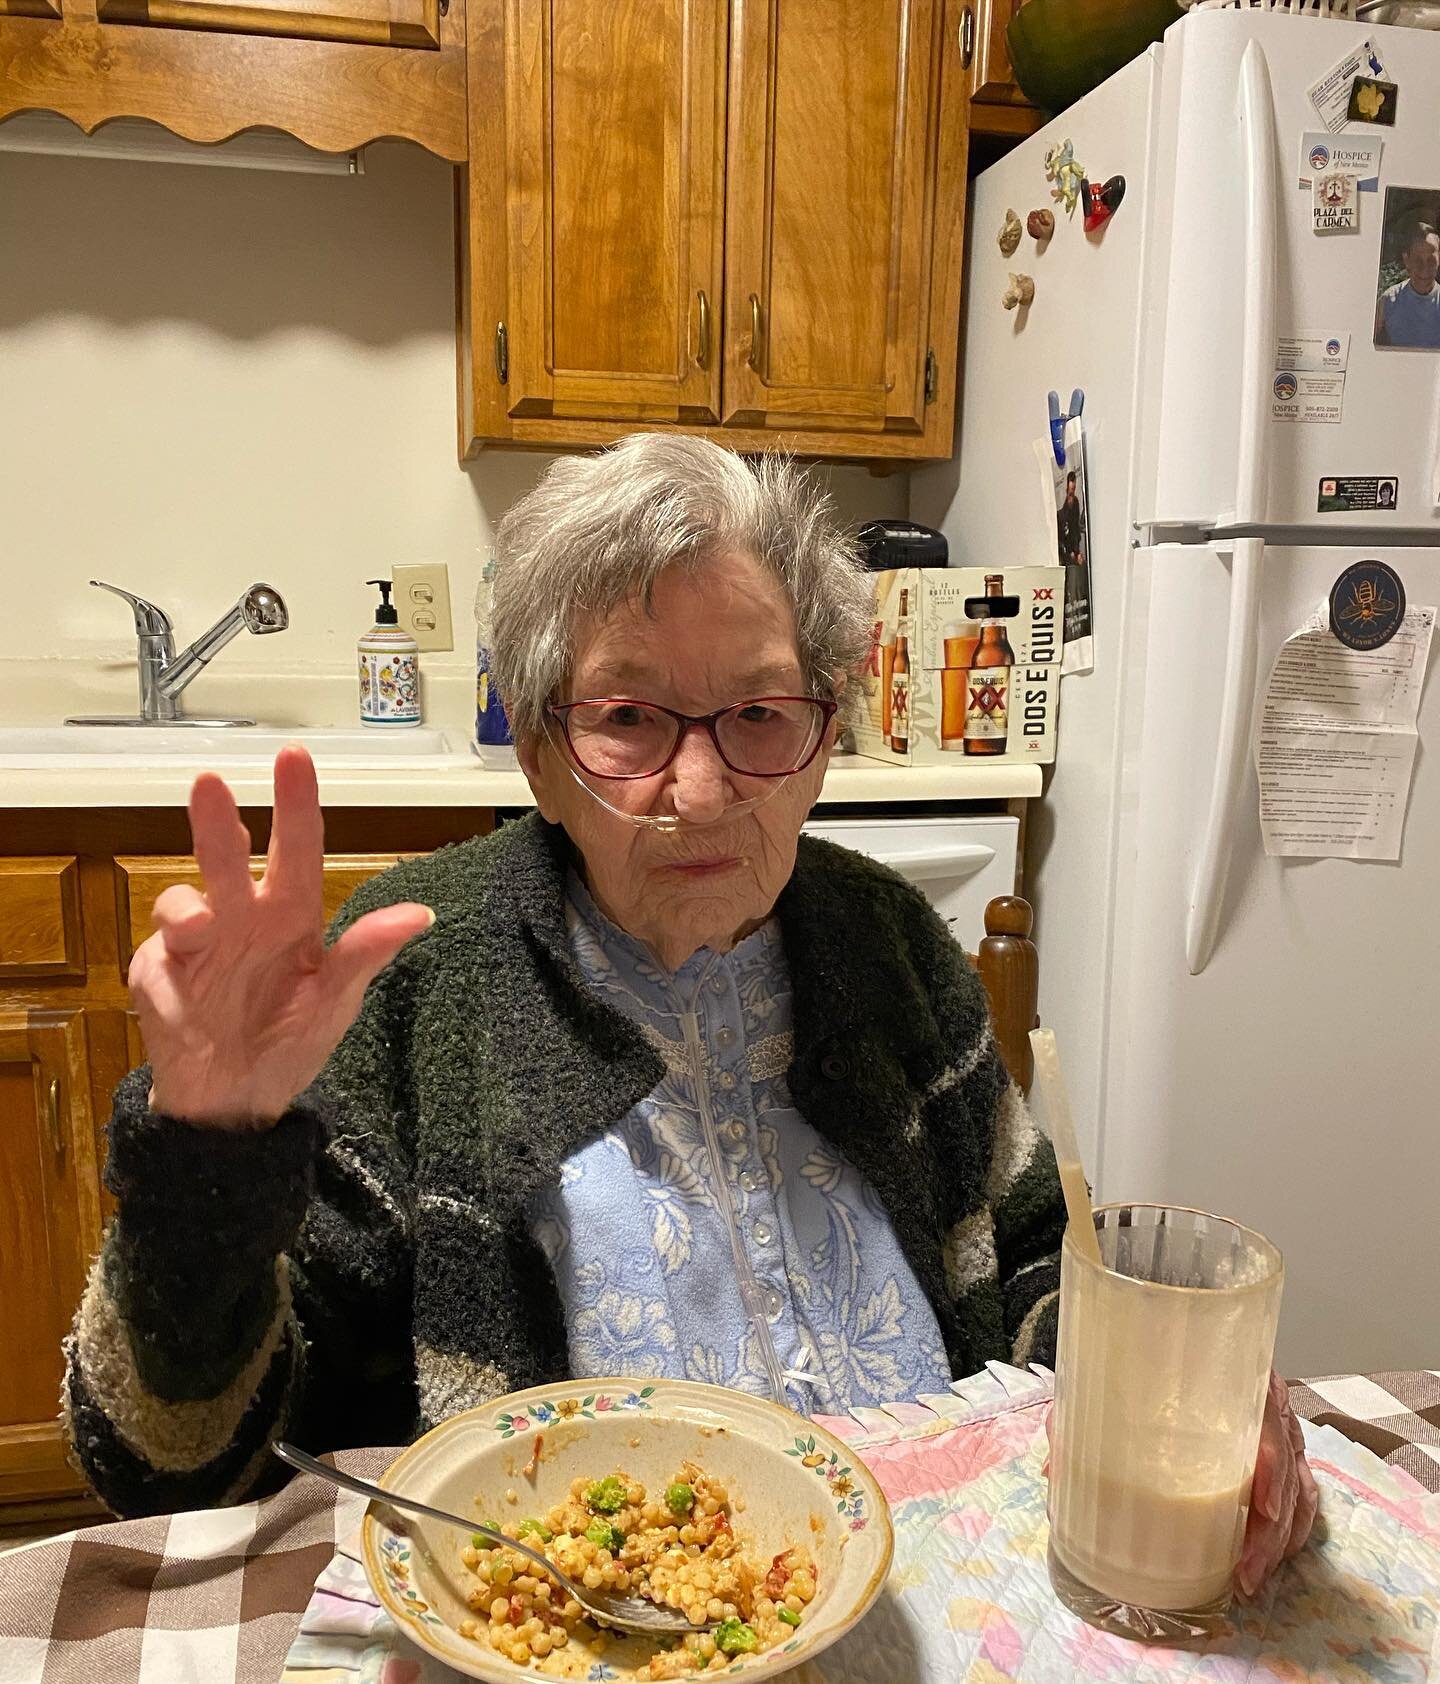 When she woke up, she told the caregiver she only wanted a snack so she could eat dinner with me 😊I may have needed to feed her tonight, but at least she was excited to see me!!!